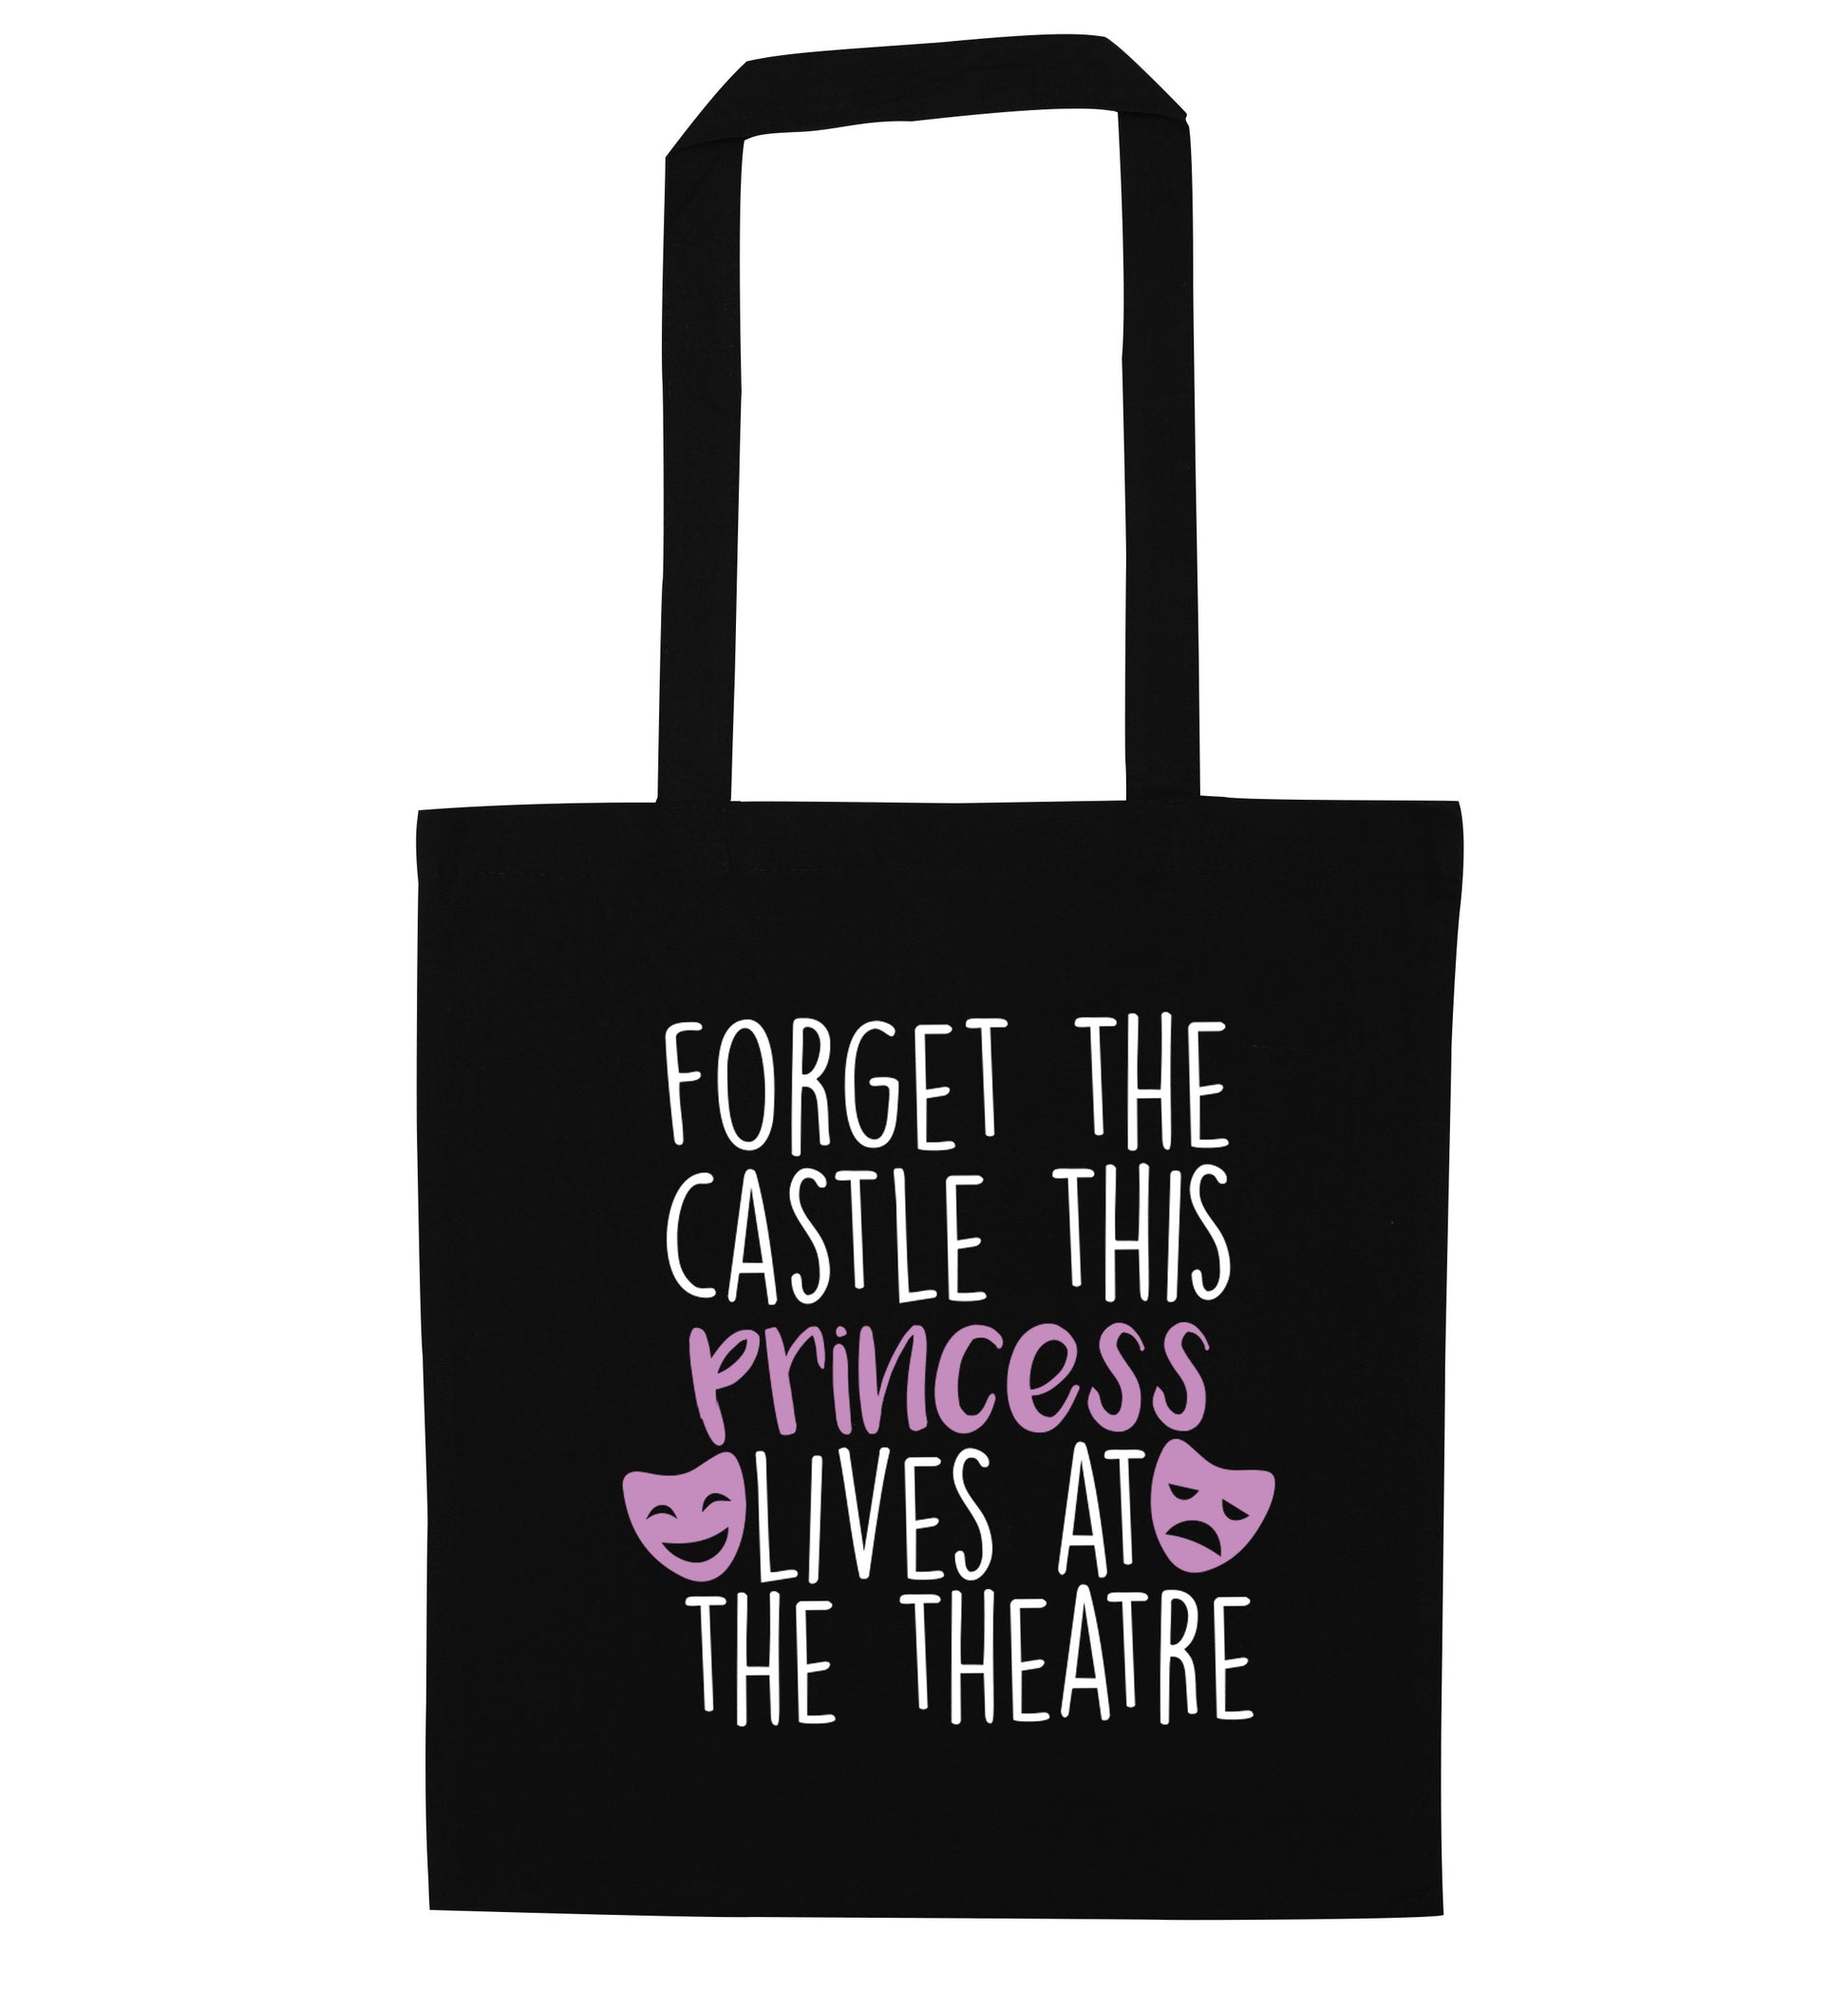 Forget the castle this princess lives at the theatre black tote bag